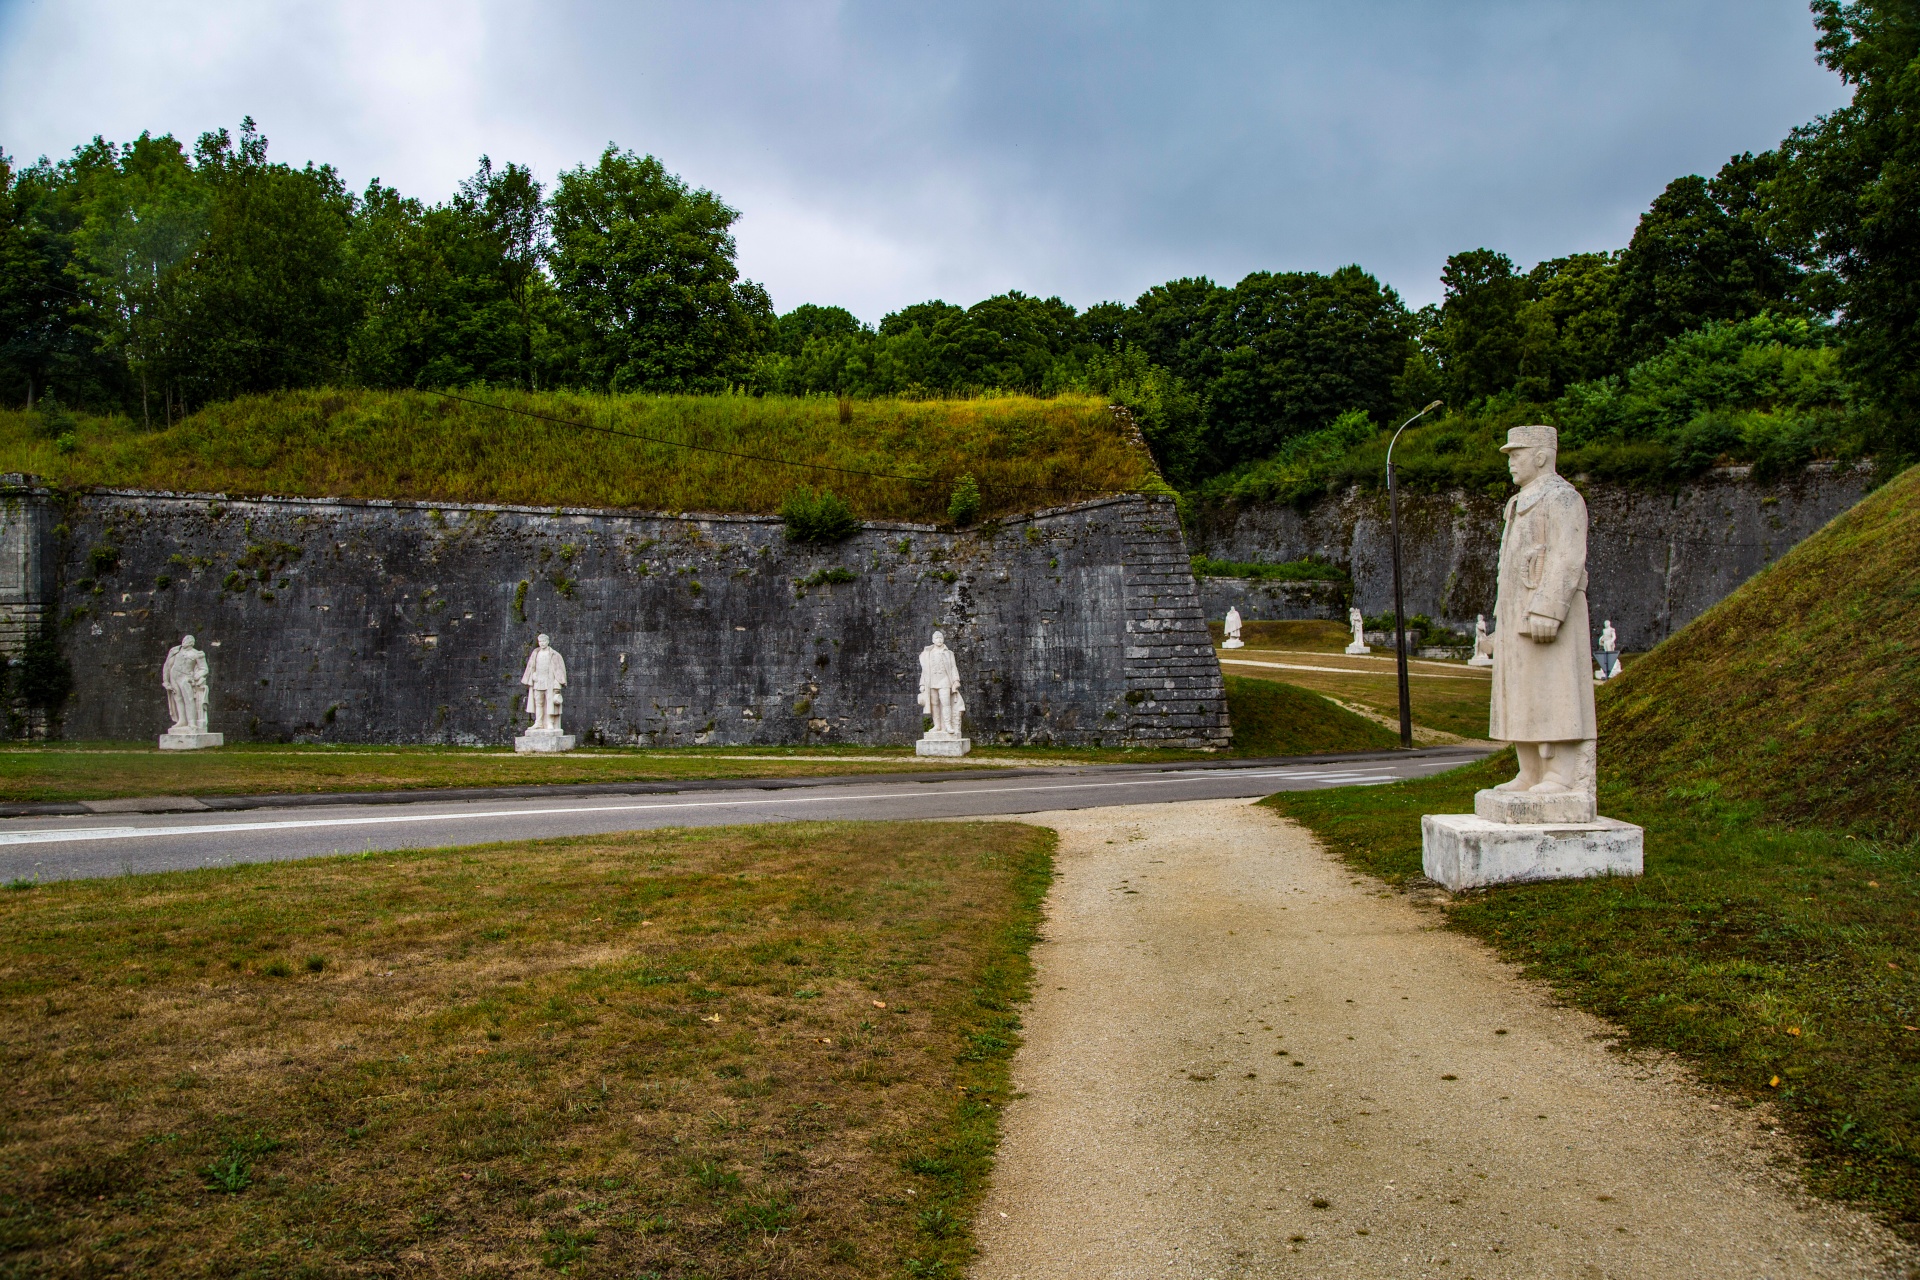 France, Meuse, Verdun, Carrefour des Marechaux (the Marshals' Crossroads), monumental statues of generals and marshals